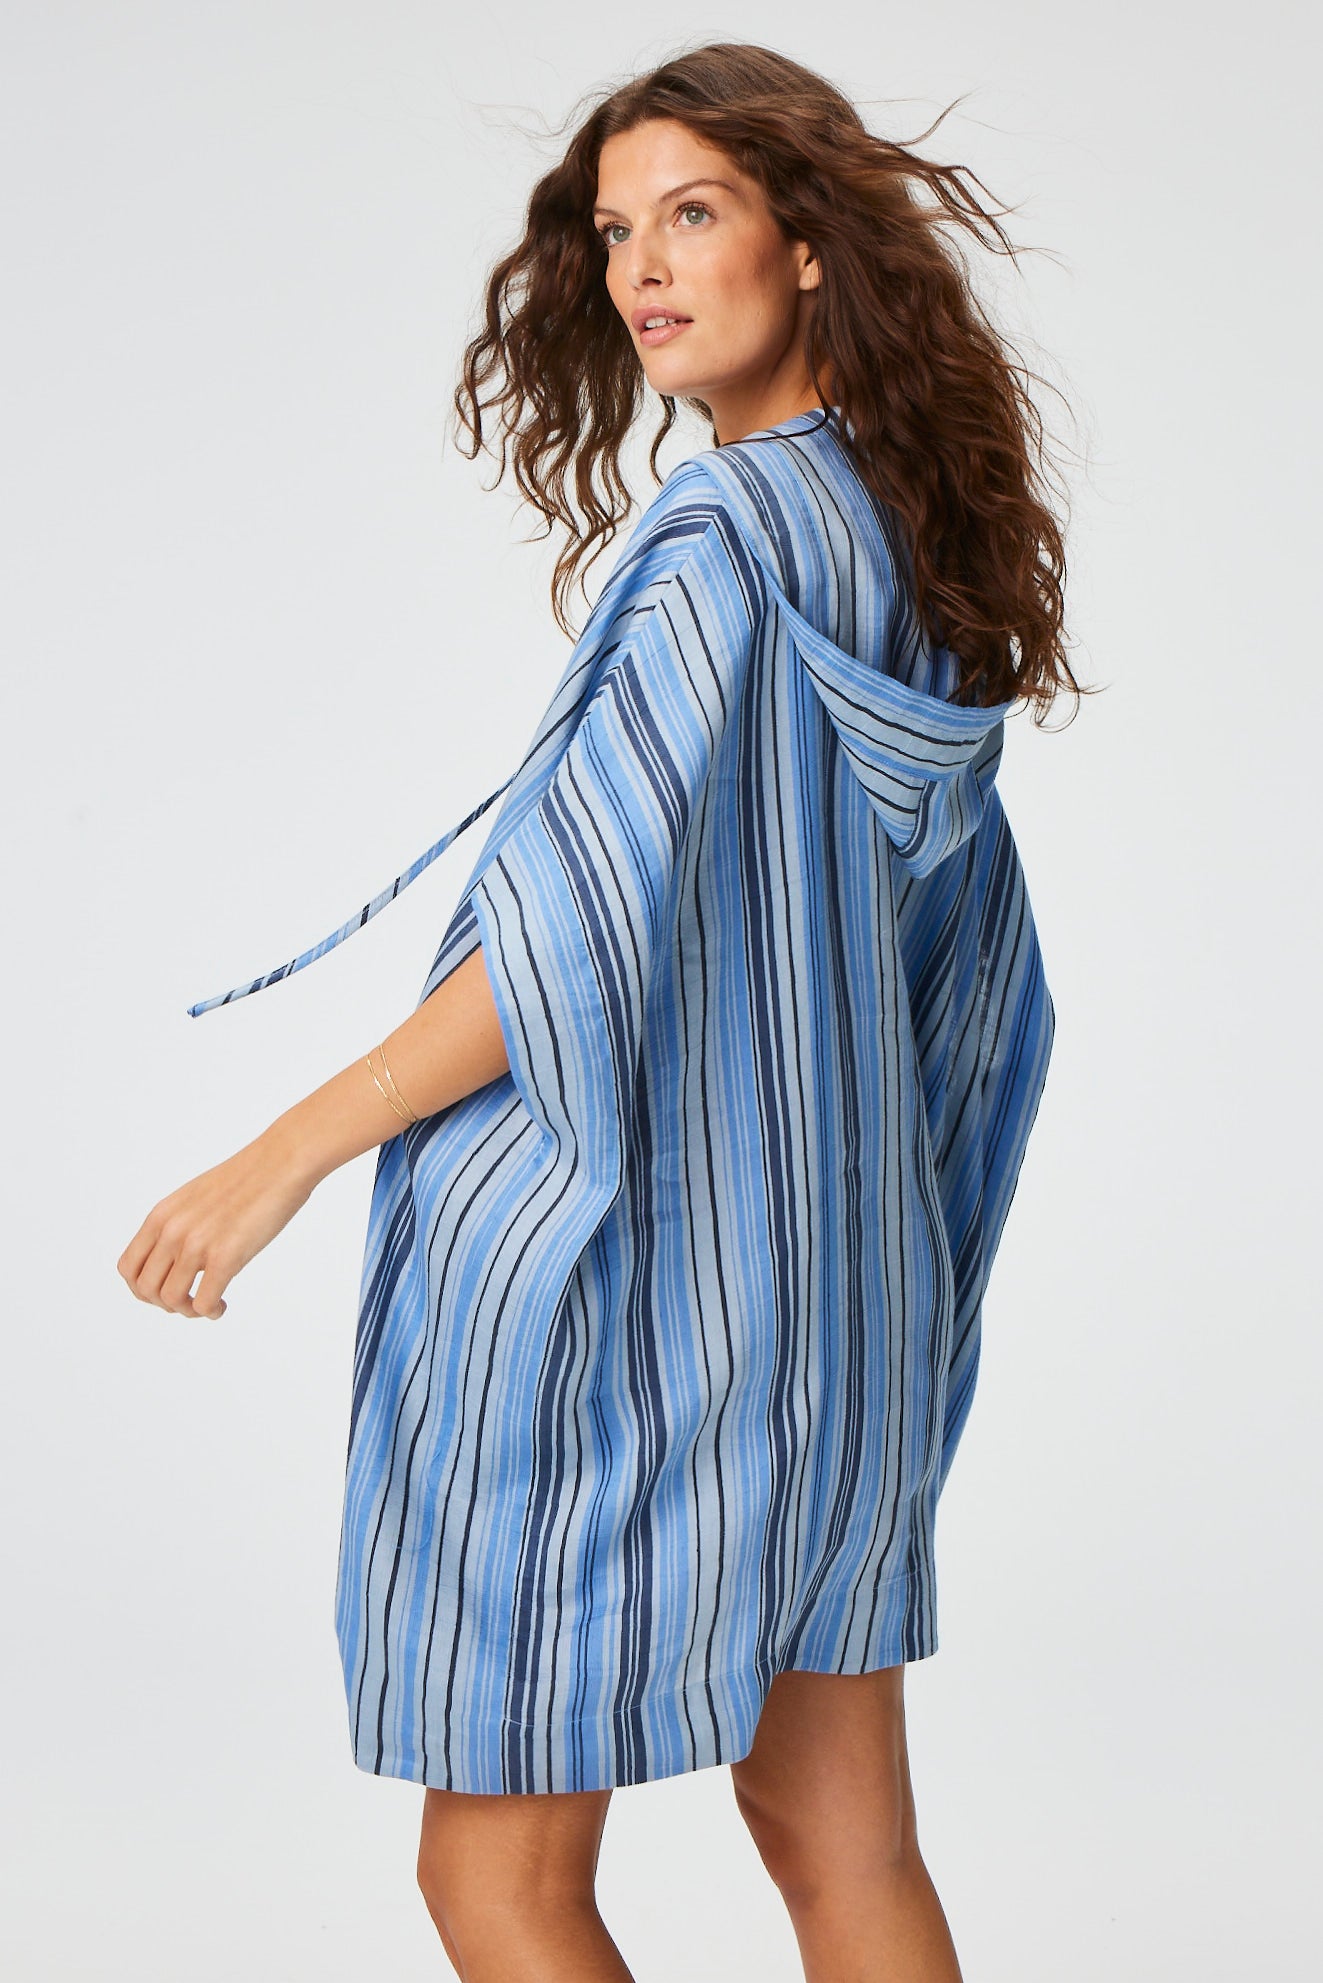 THE HOODED PONCHO in SEA STRIPED LINEN